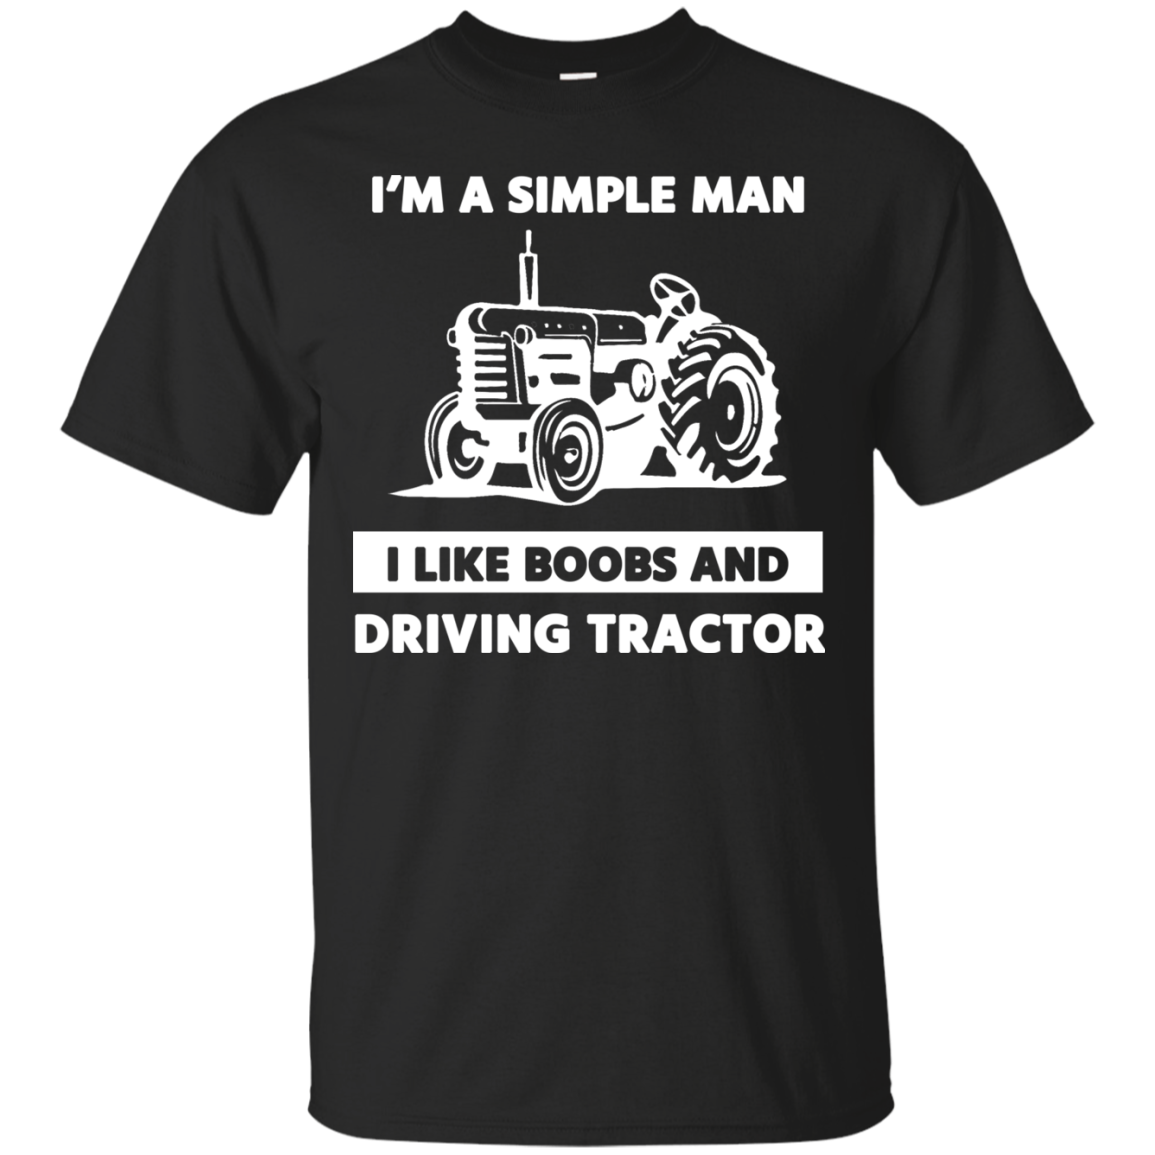 Tank t Shirt. Russian Tank t-Shirt. Tank t-Shirt Print. You join Tank t Shirt. Be a simple man